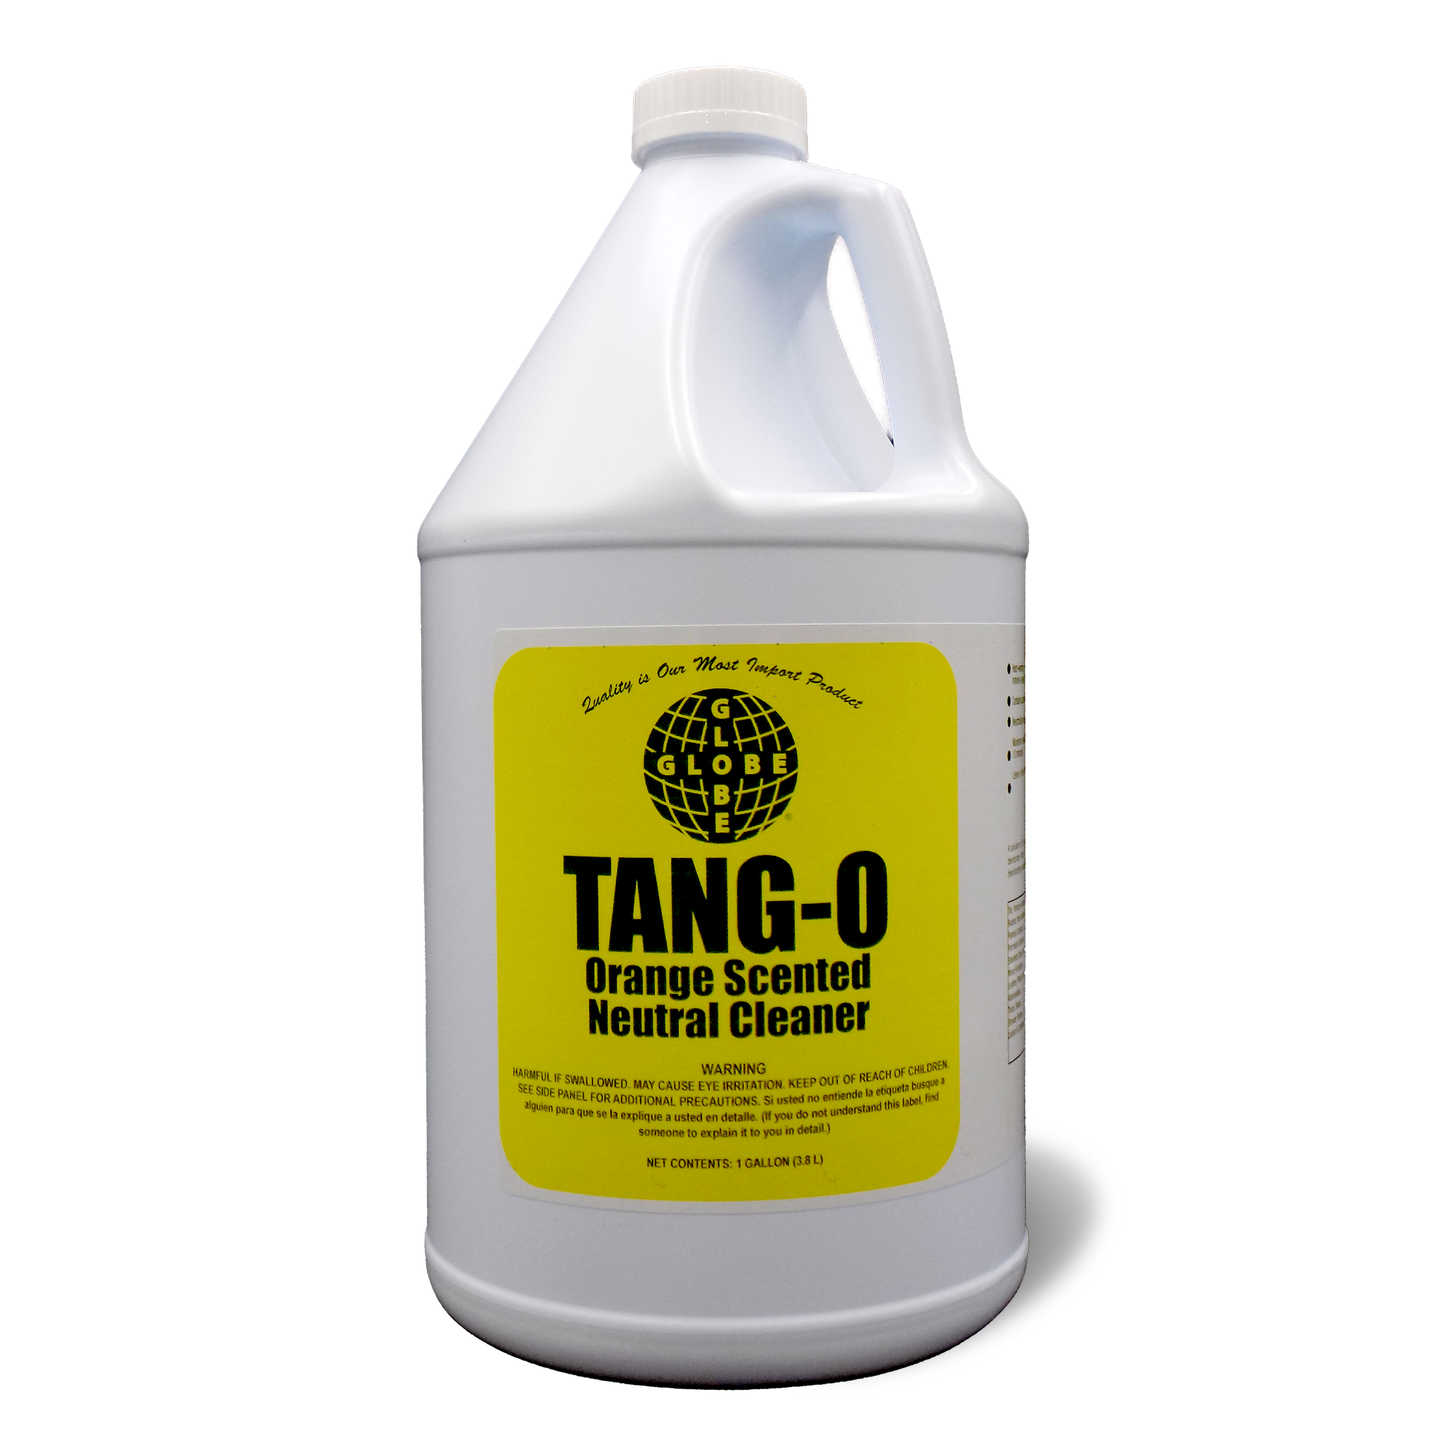 Tang-O, Orange Scented, Neutral Cleaner